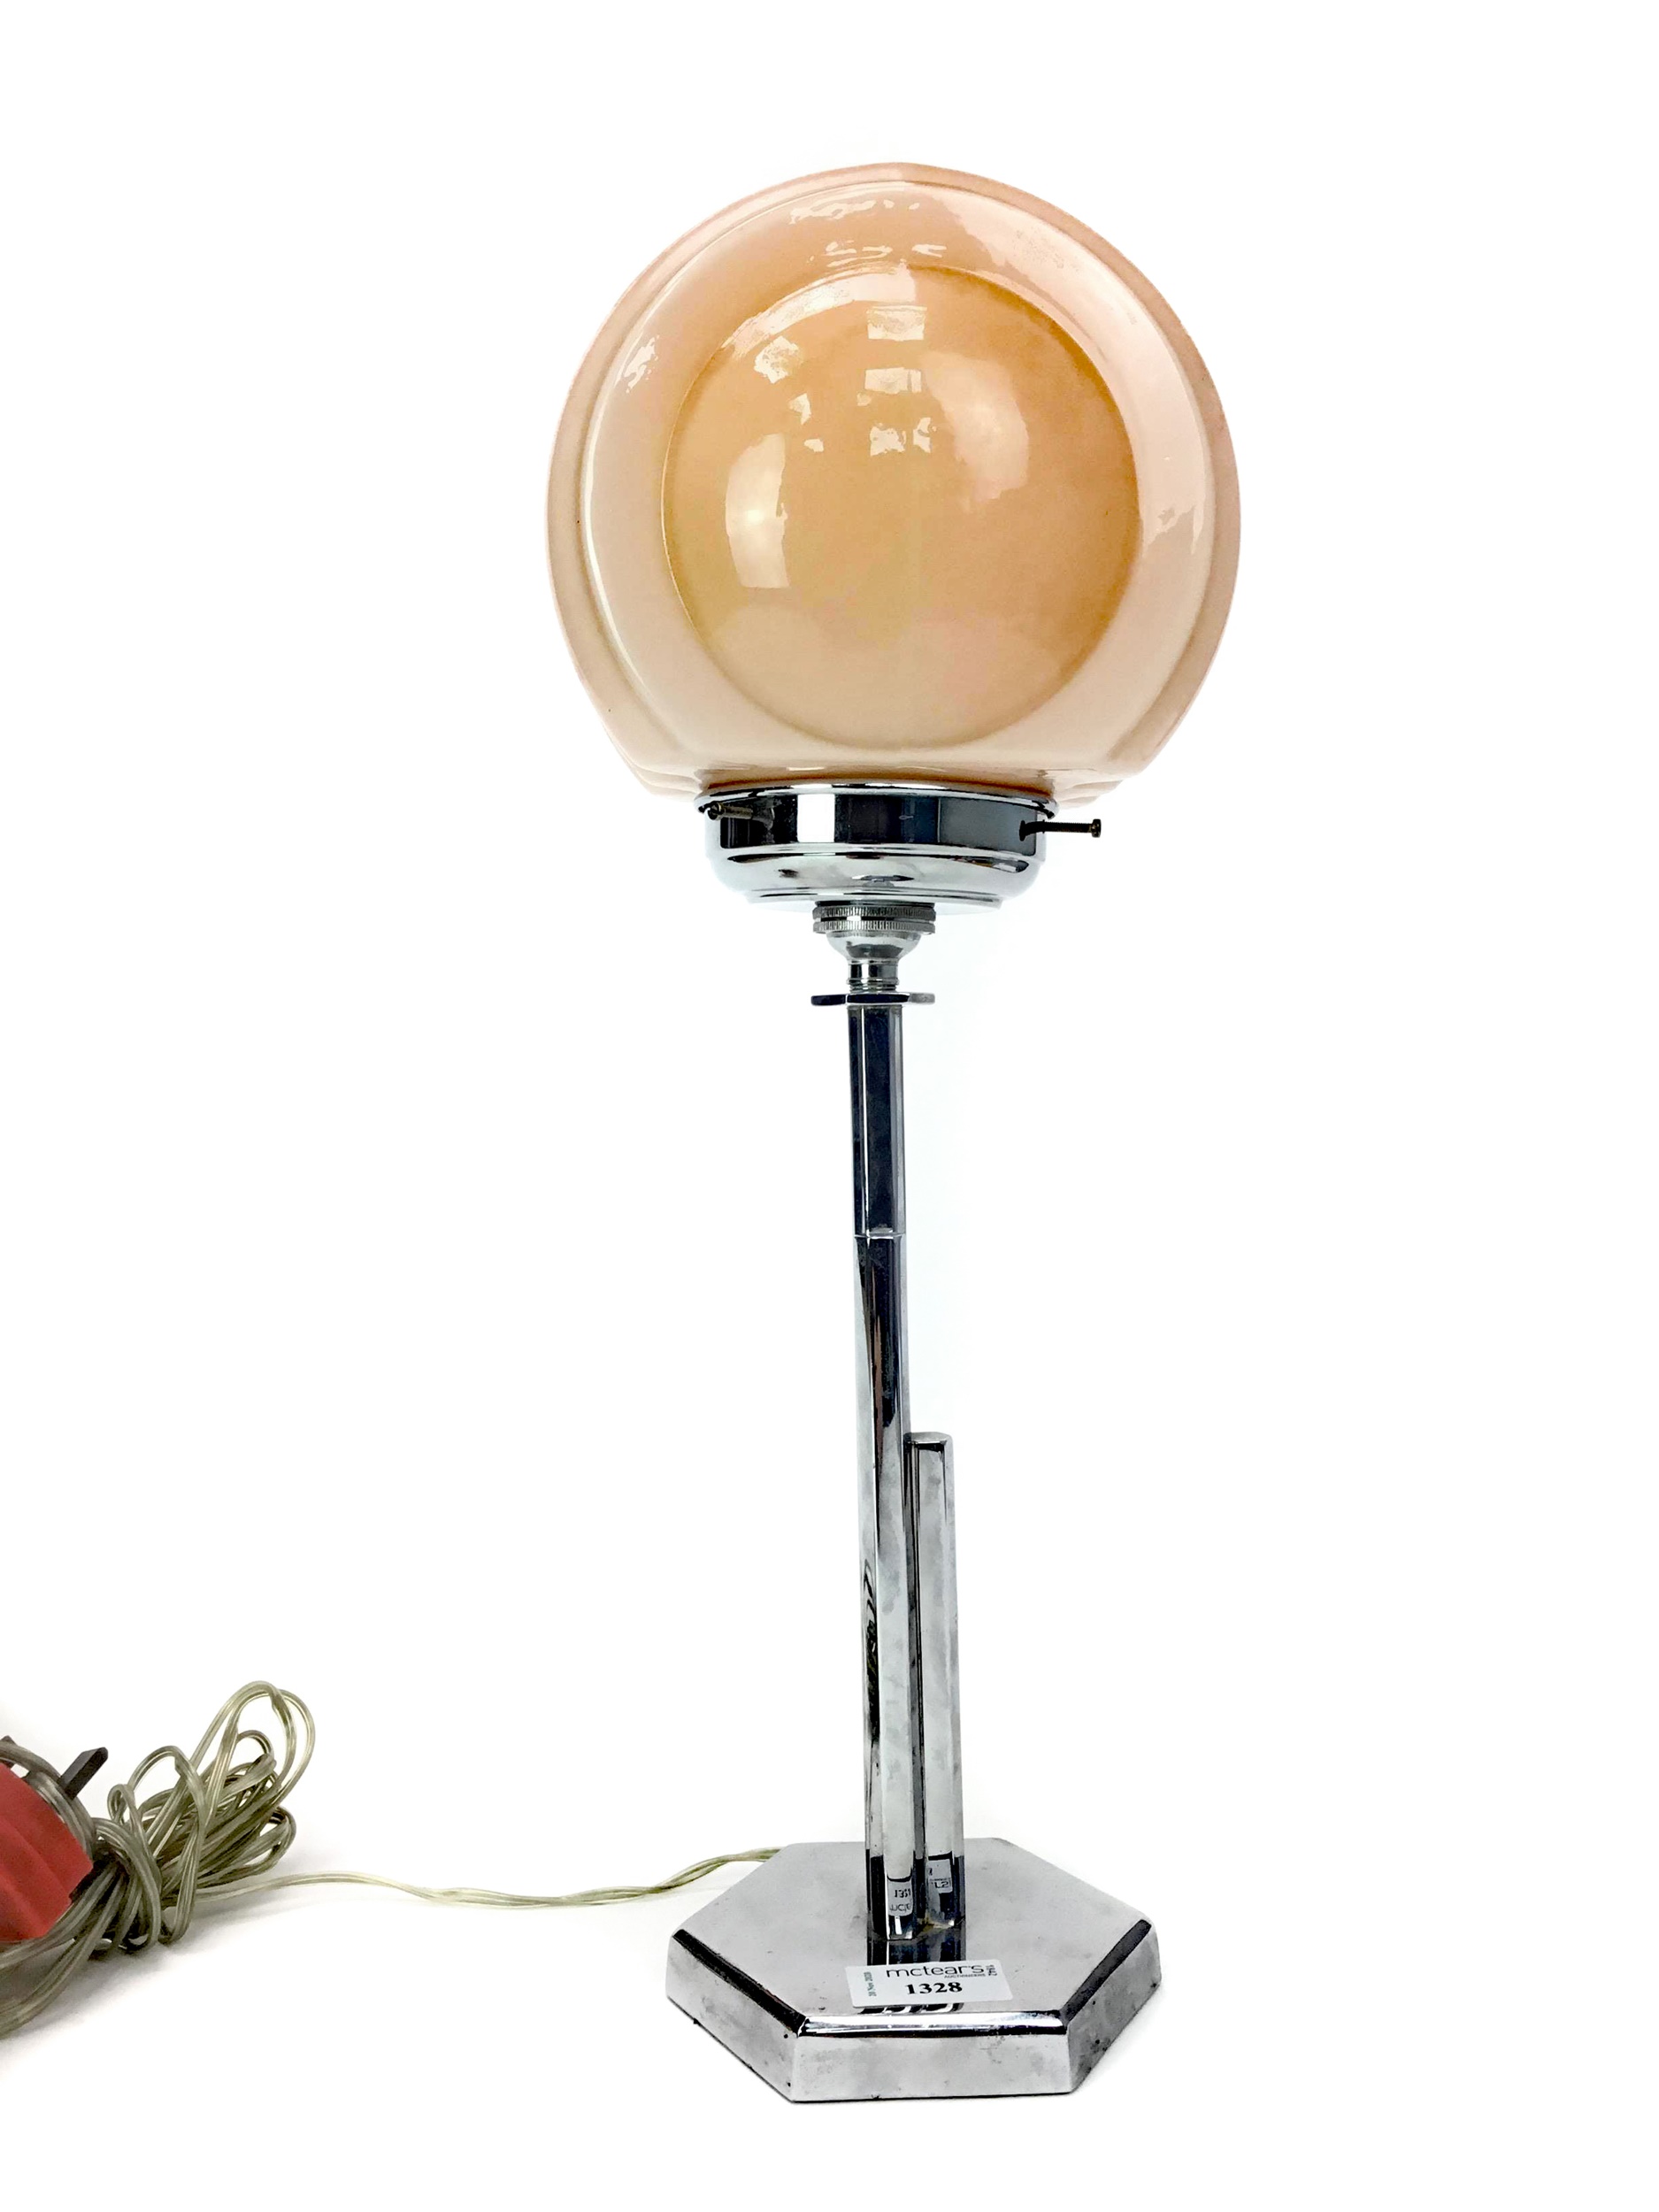 AN ART DECO CHROME TABLE LAMP WITH OPAQUE GLASS SHADE